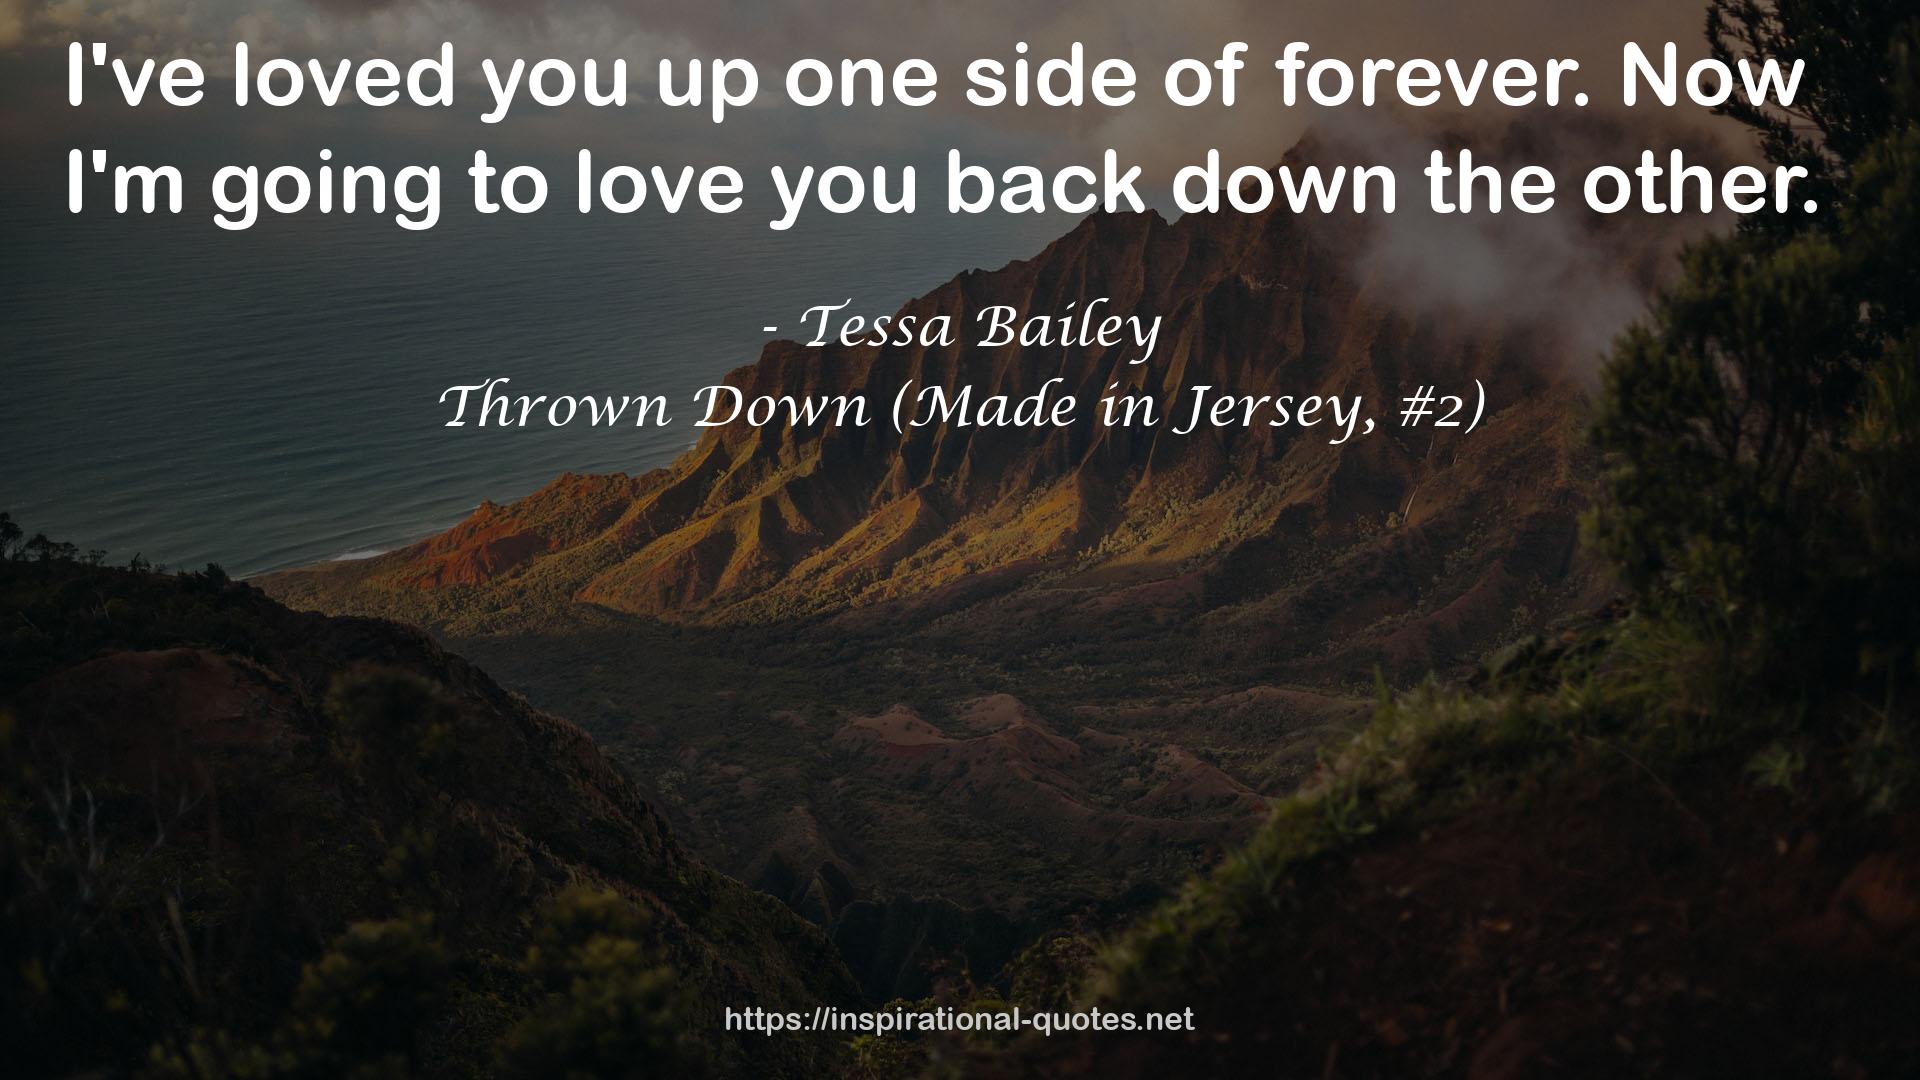 Thrown Down (Made in Jersey, #2) QUOTES